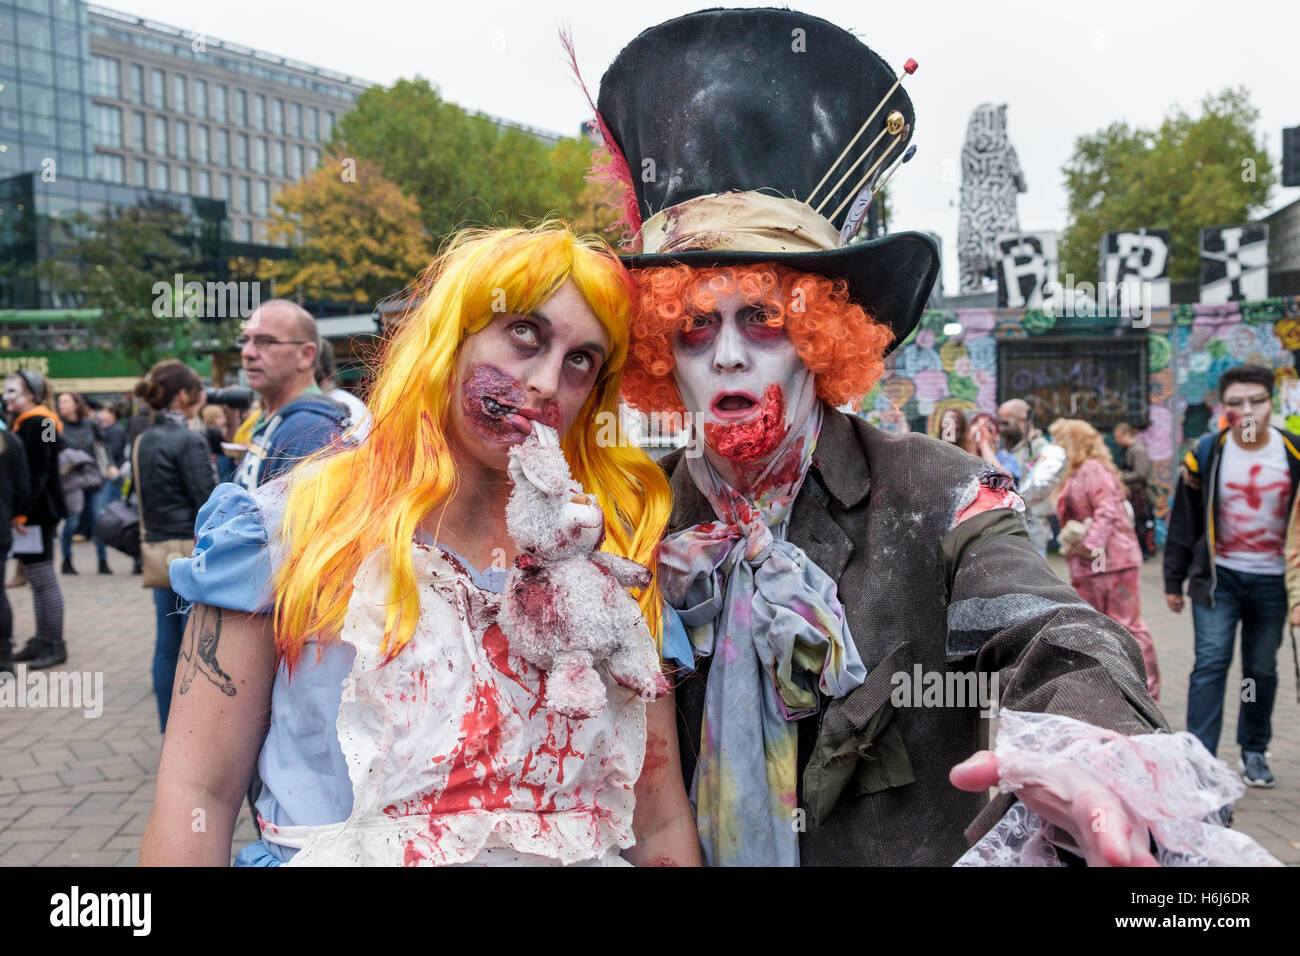 Bristol, UK. 29th Oct, 2016. Two people dressed as zombies with painted faces,make up and dressed as zombies are pictured as they participate in a Zombie Walk In Bristol. Credit:  lynchpics/Alamy Live News Stock Photo